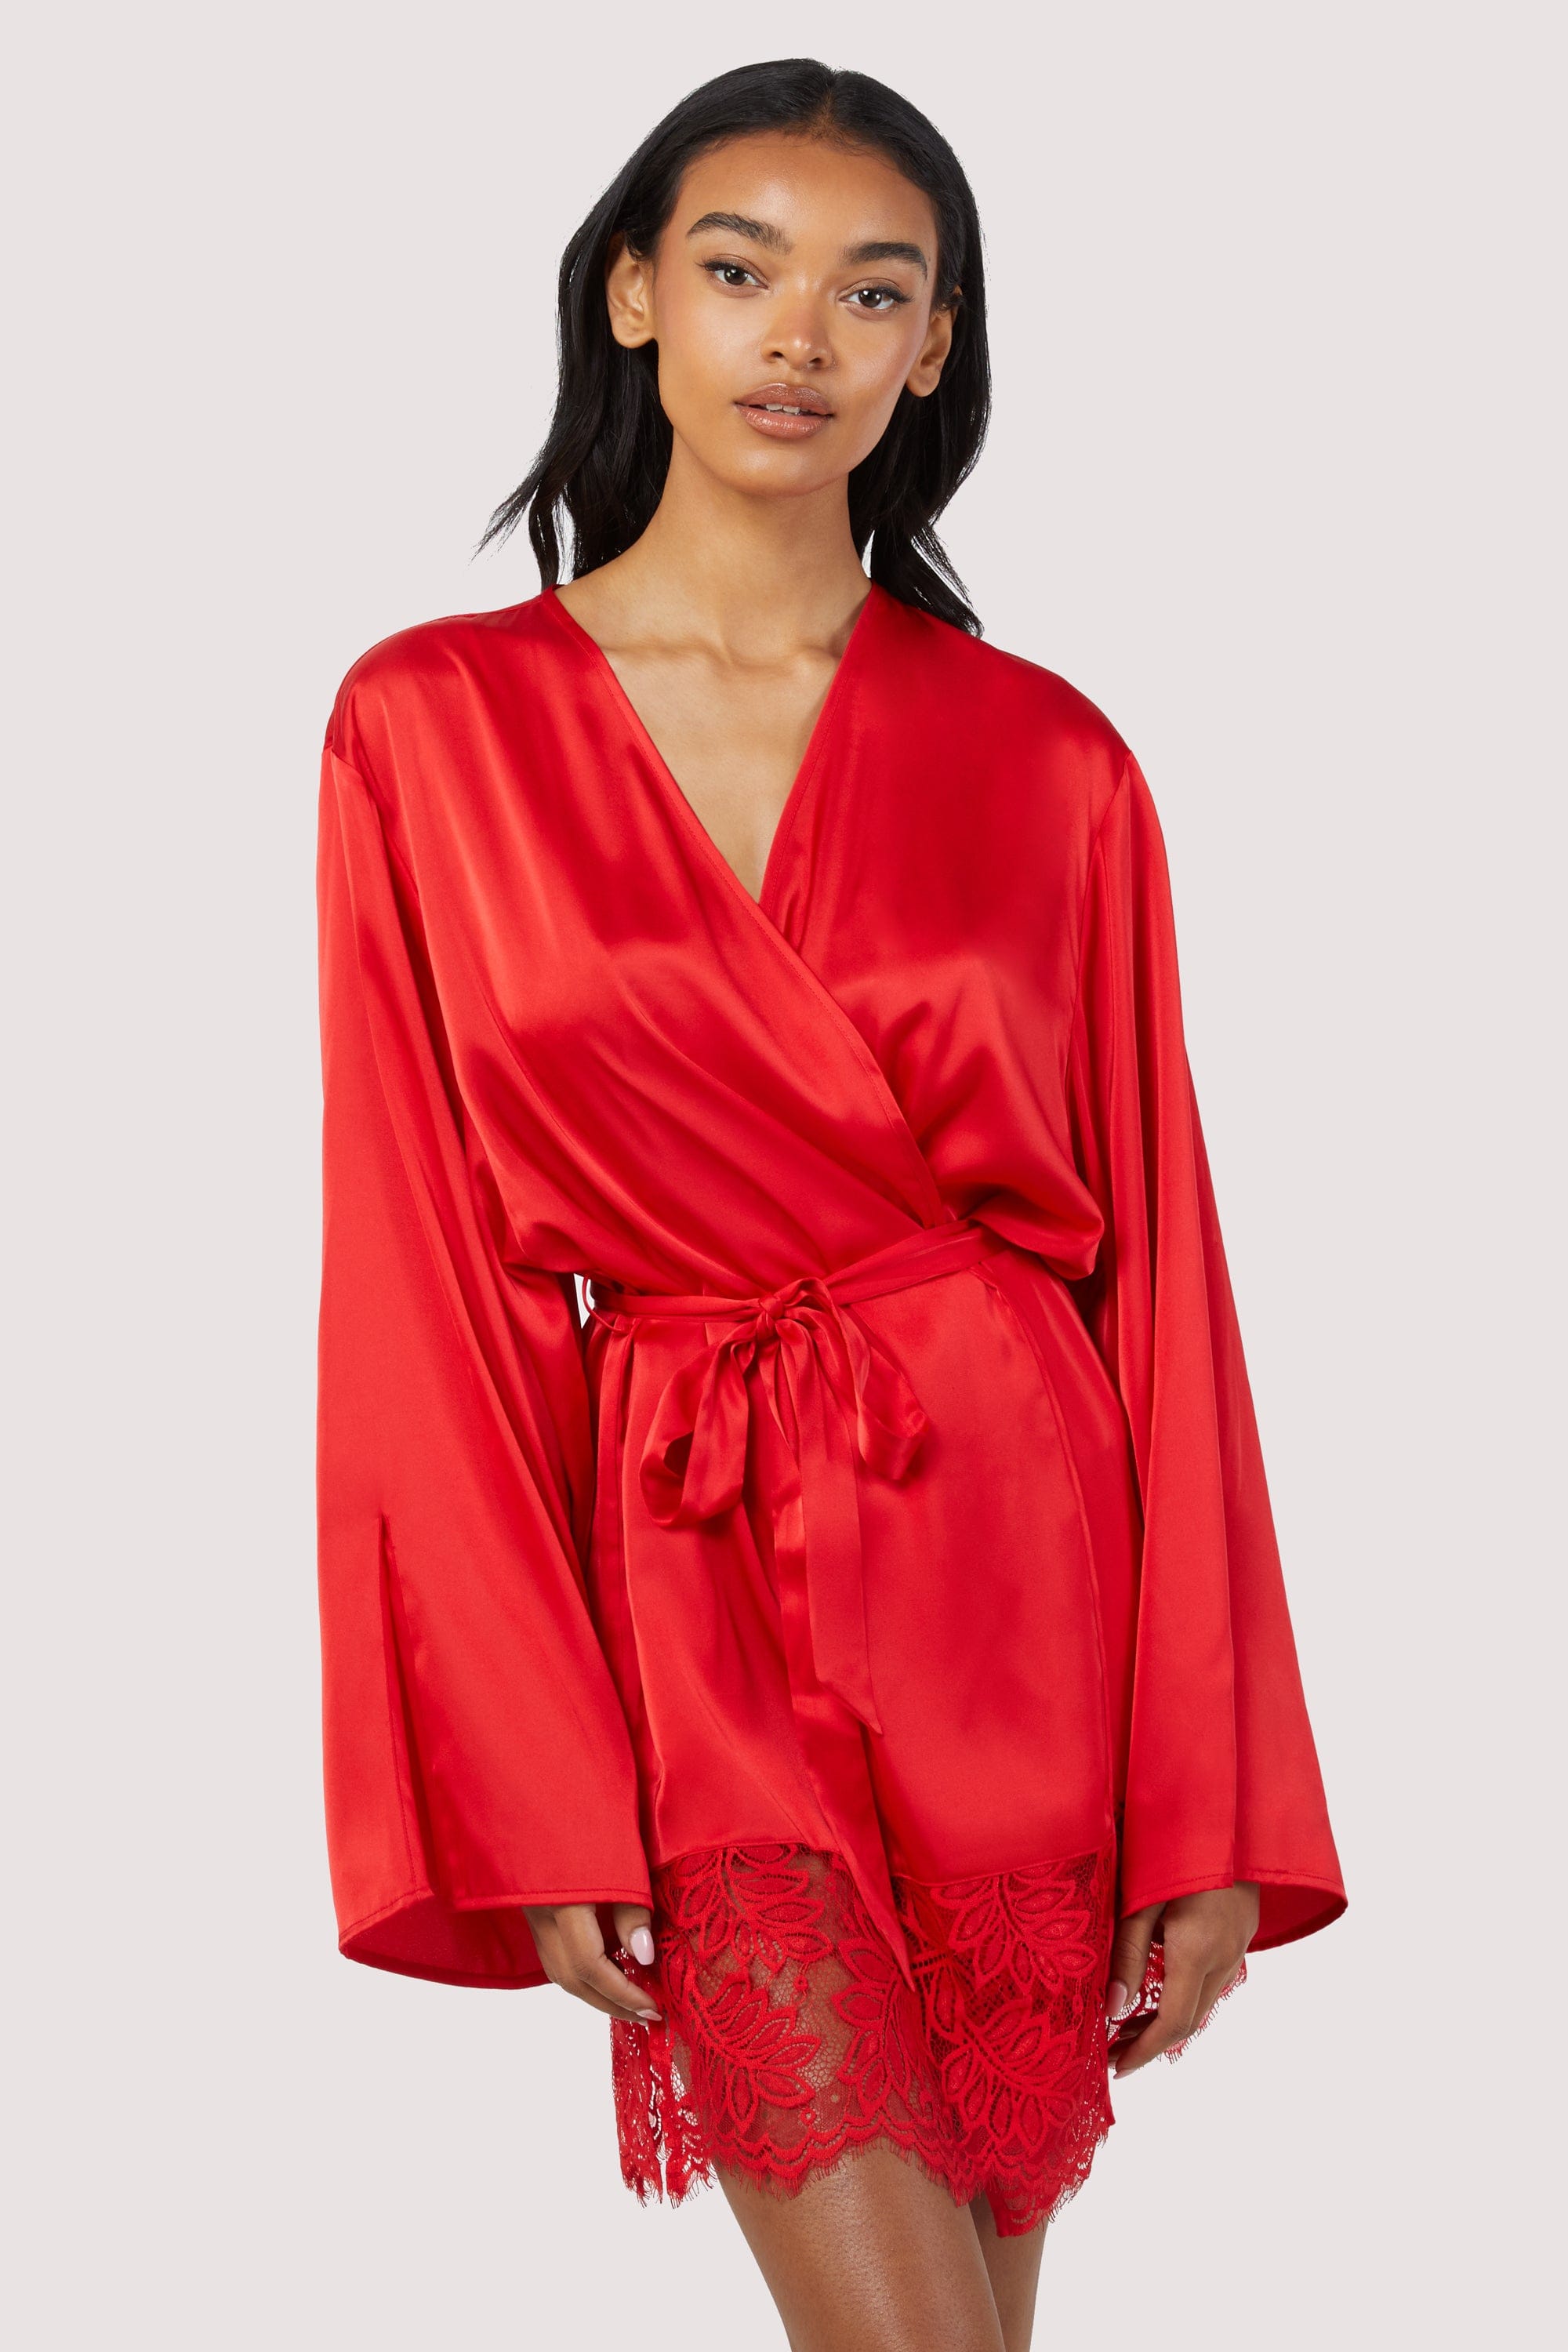 Rosie Red Satin and Lace Robe